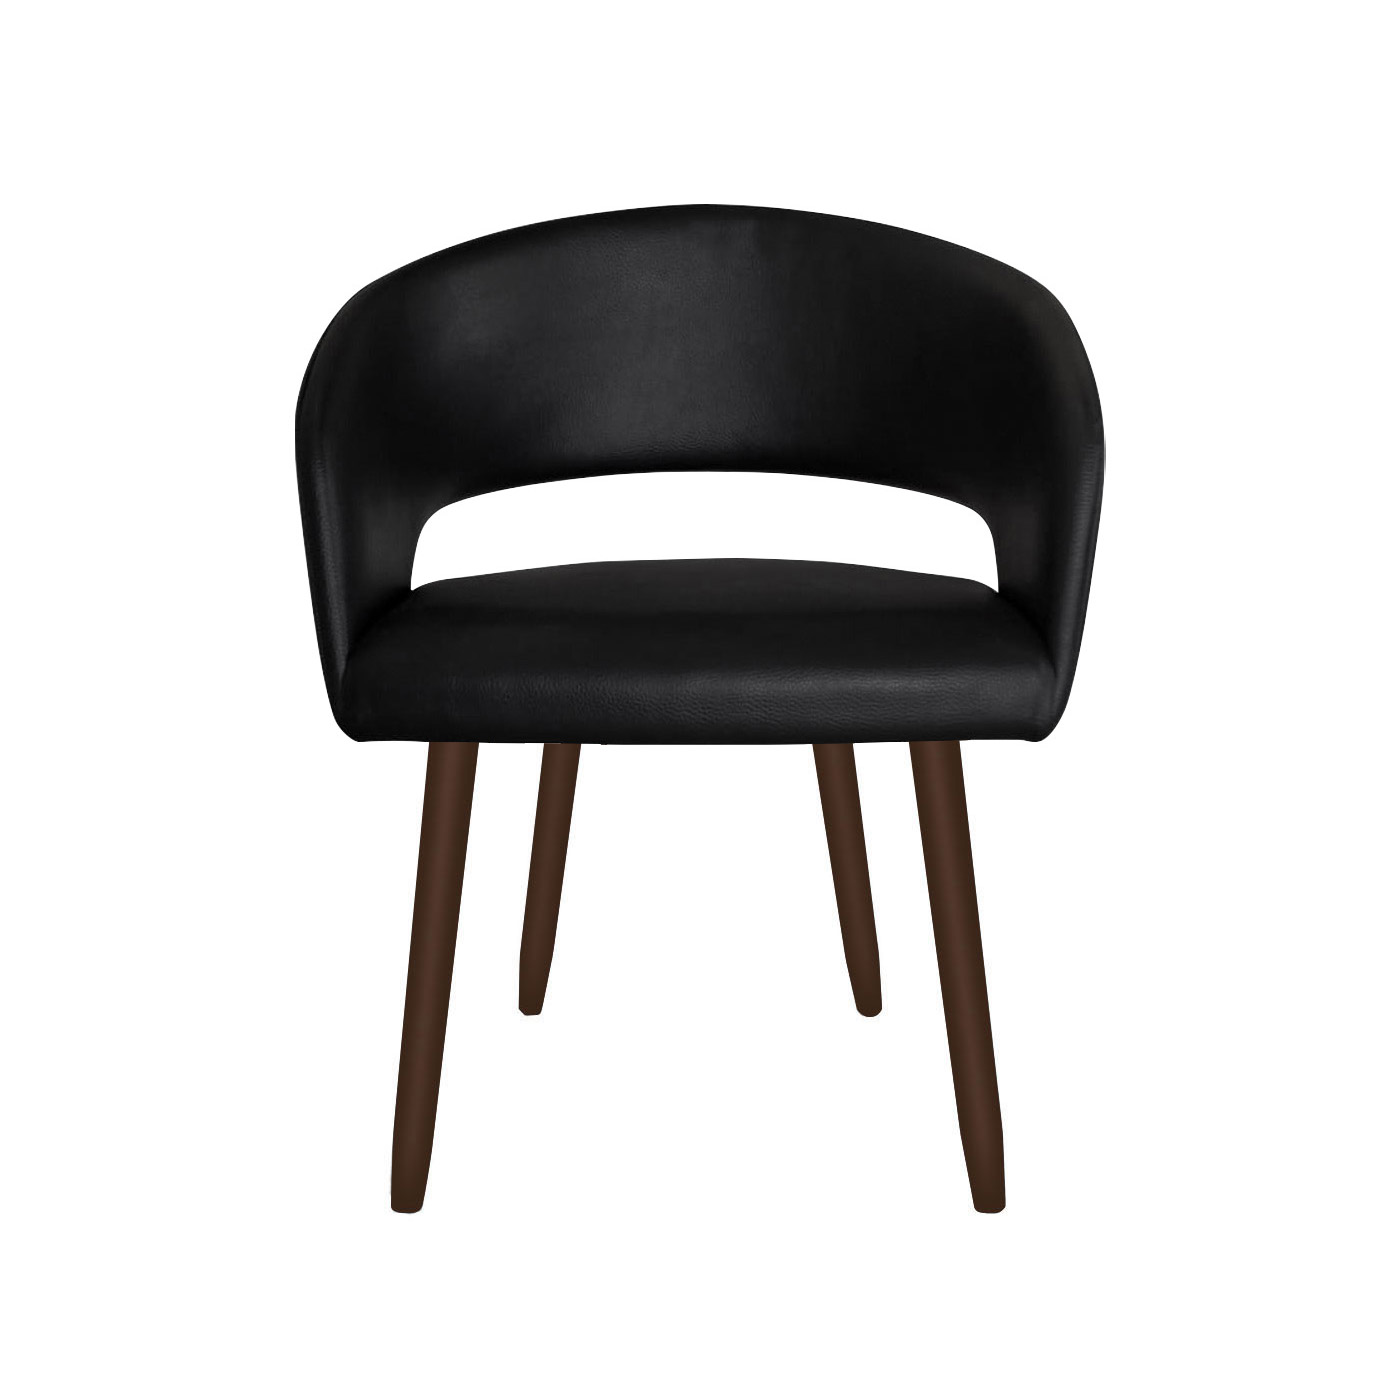 Ostrava Faux Leather Dark Dining Chair